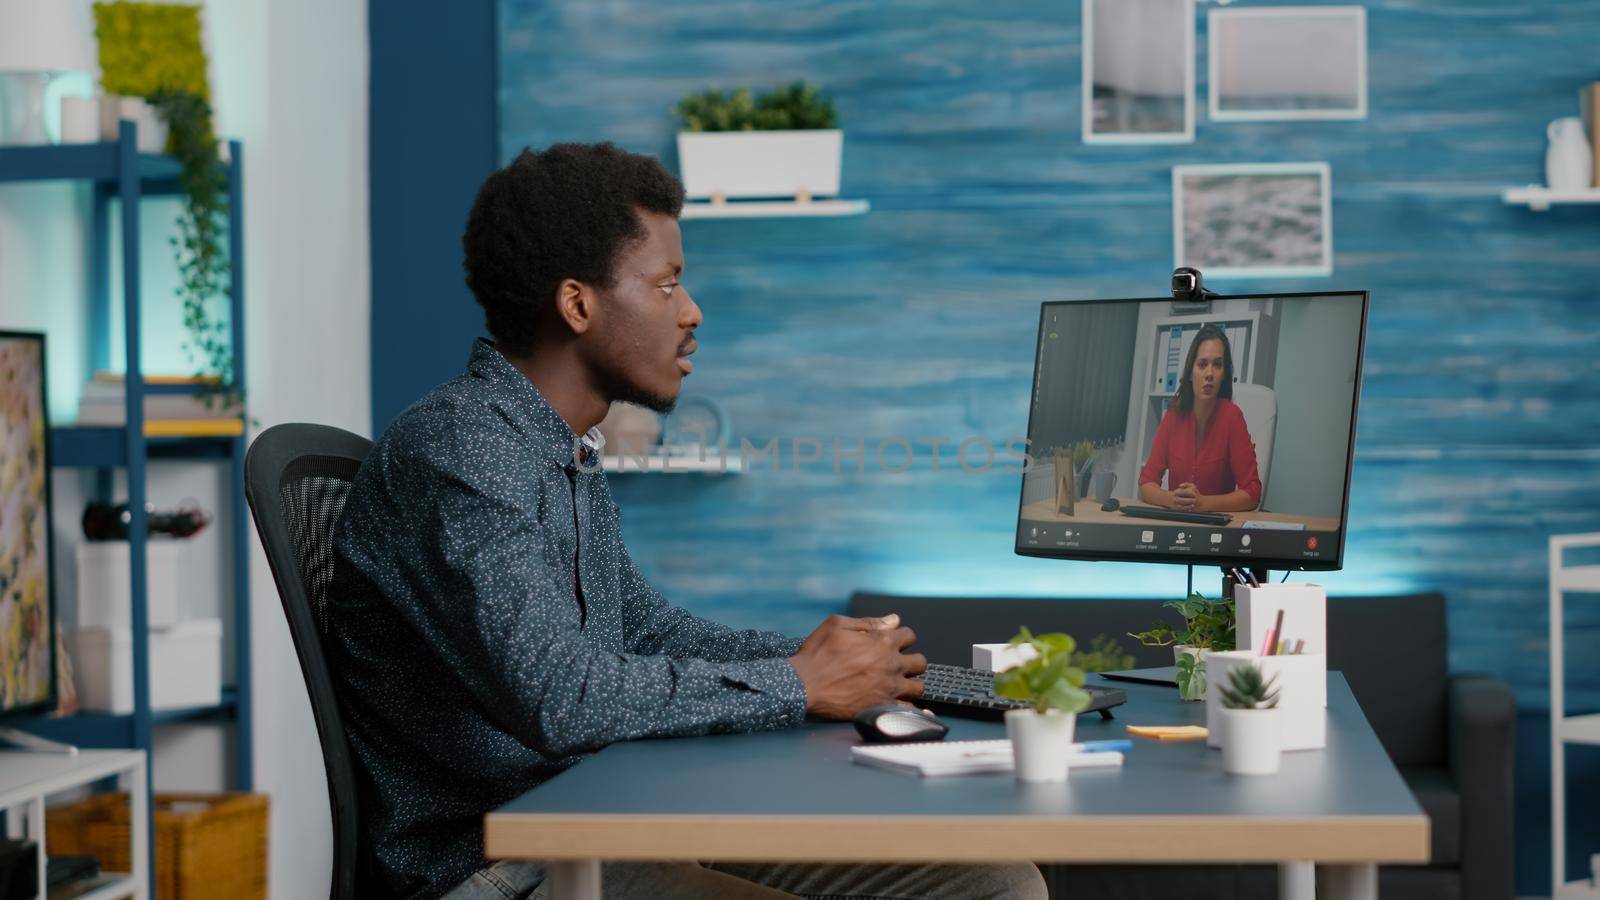 Remote worker working from home, talking on online conference internet video call with woman coworker. African american man on web teleconference, using computer webcam as communication device